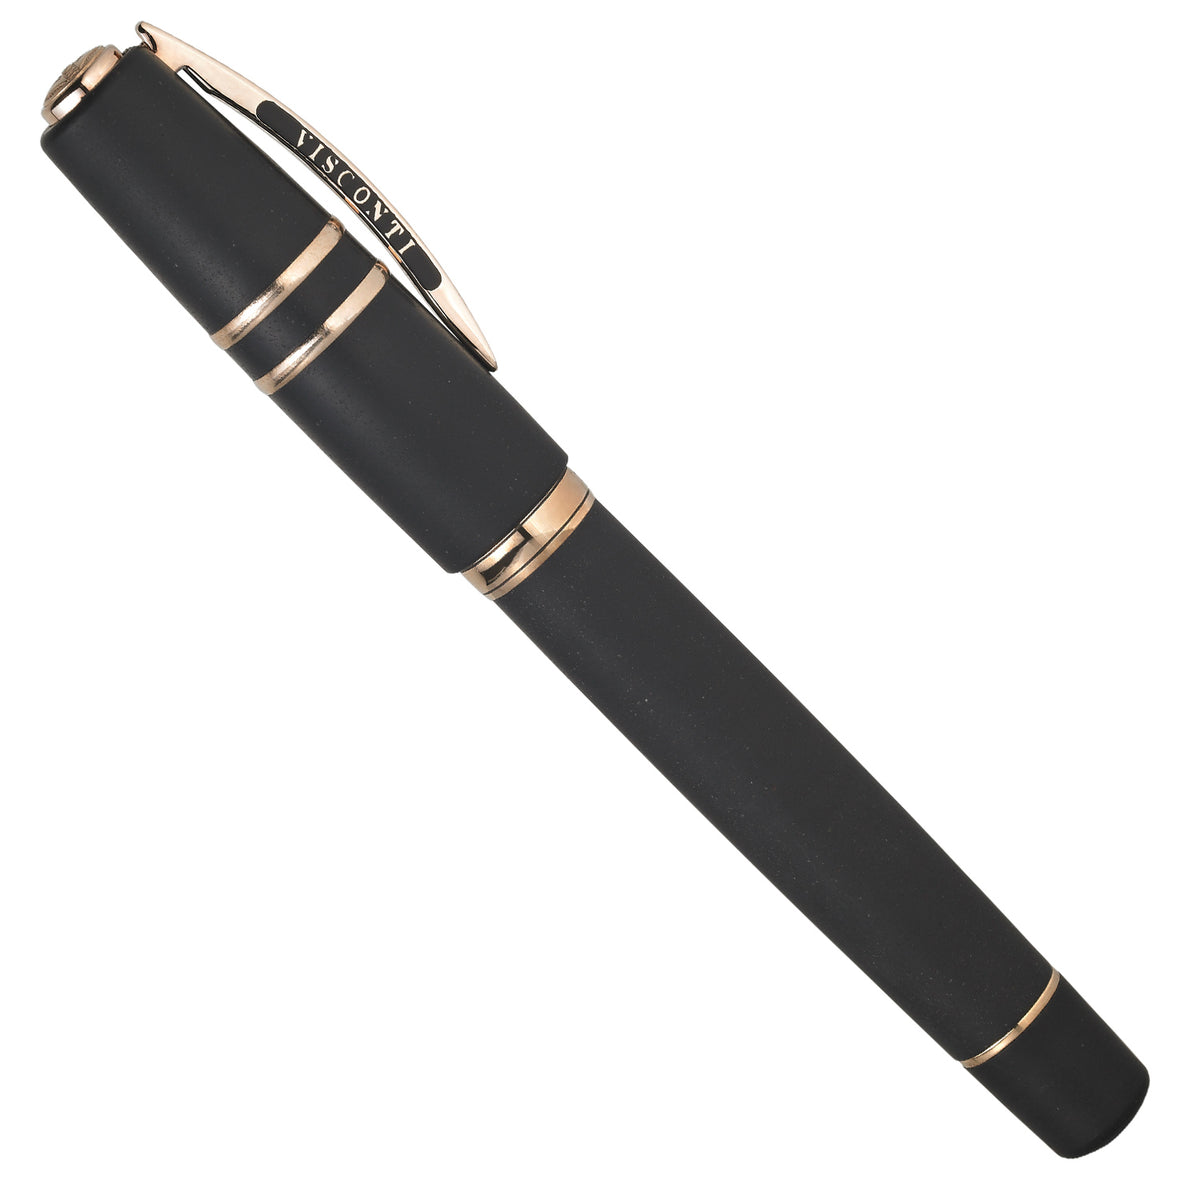 A Visconti Homo Sapiens Bronze Age Fountain Pen by Coles of London with a rose gold trim.